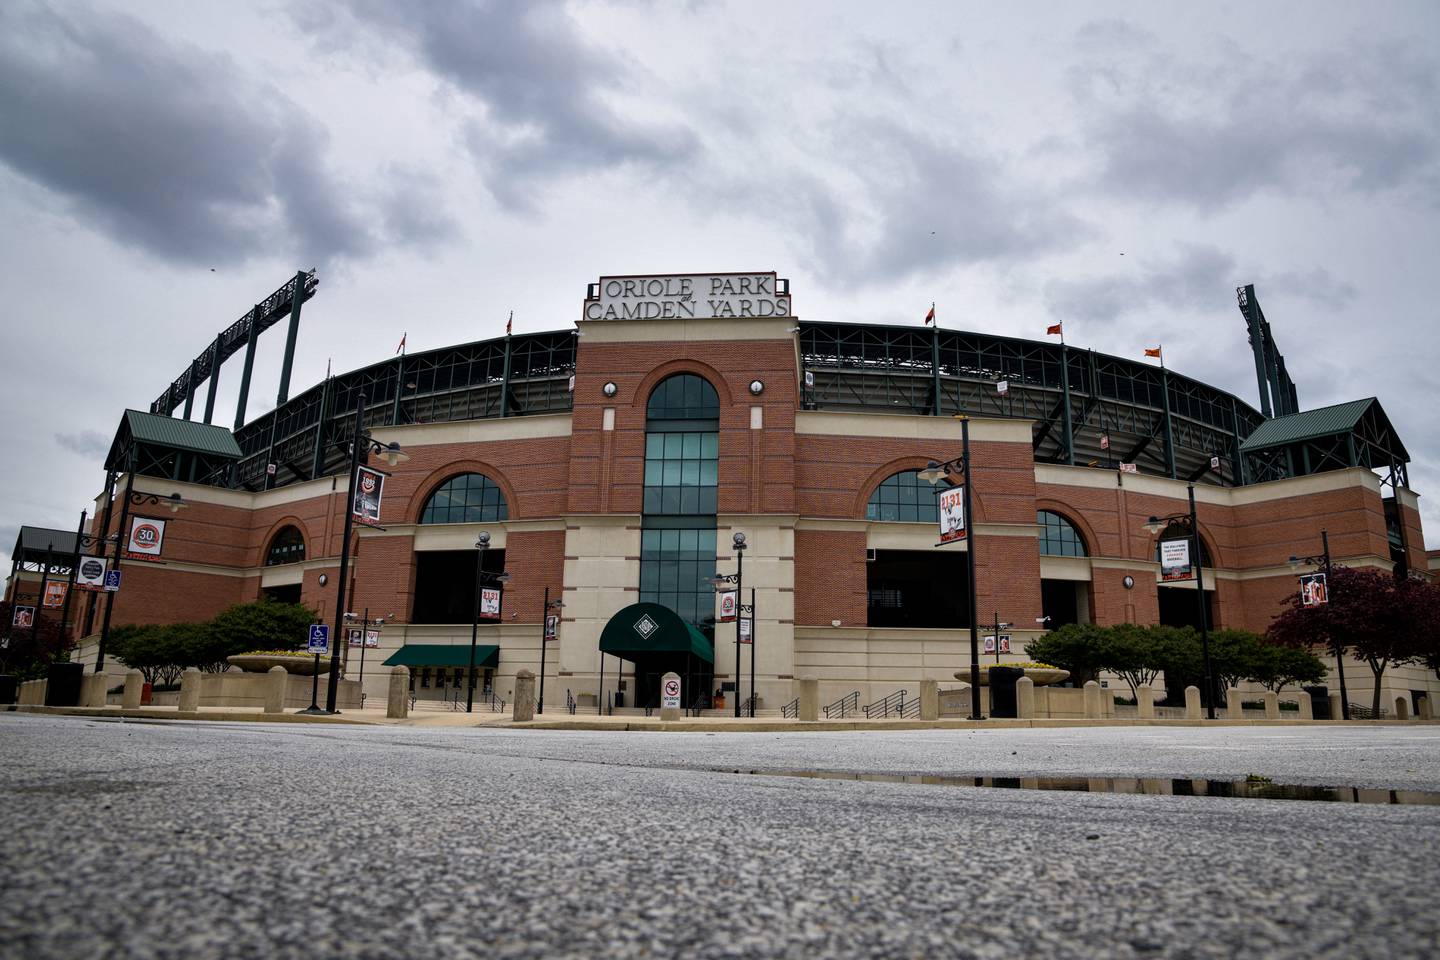 Orioles, Gov. Moore announce partnership to revitalize Camden Yards sports  complex